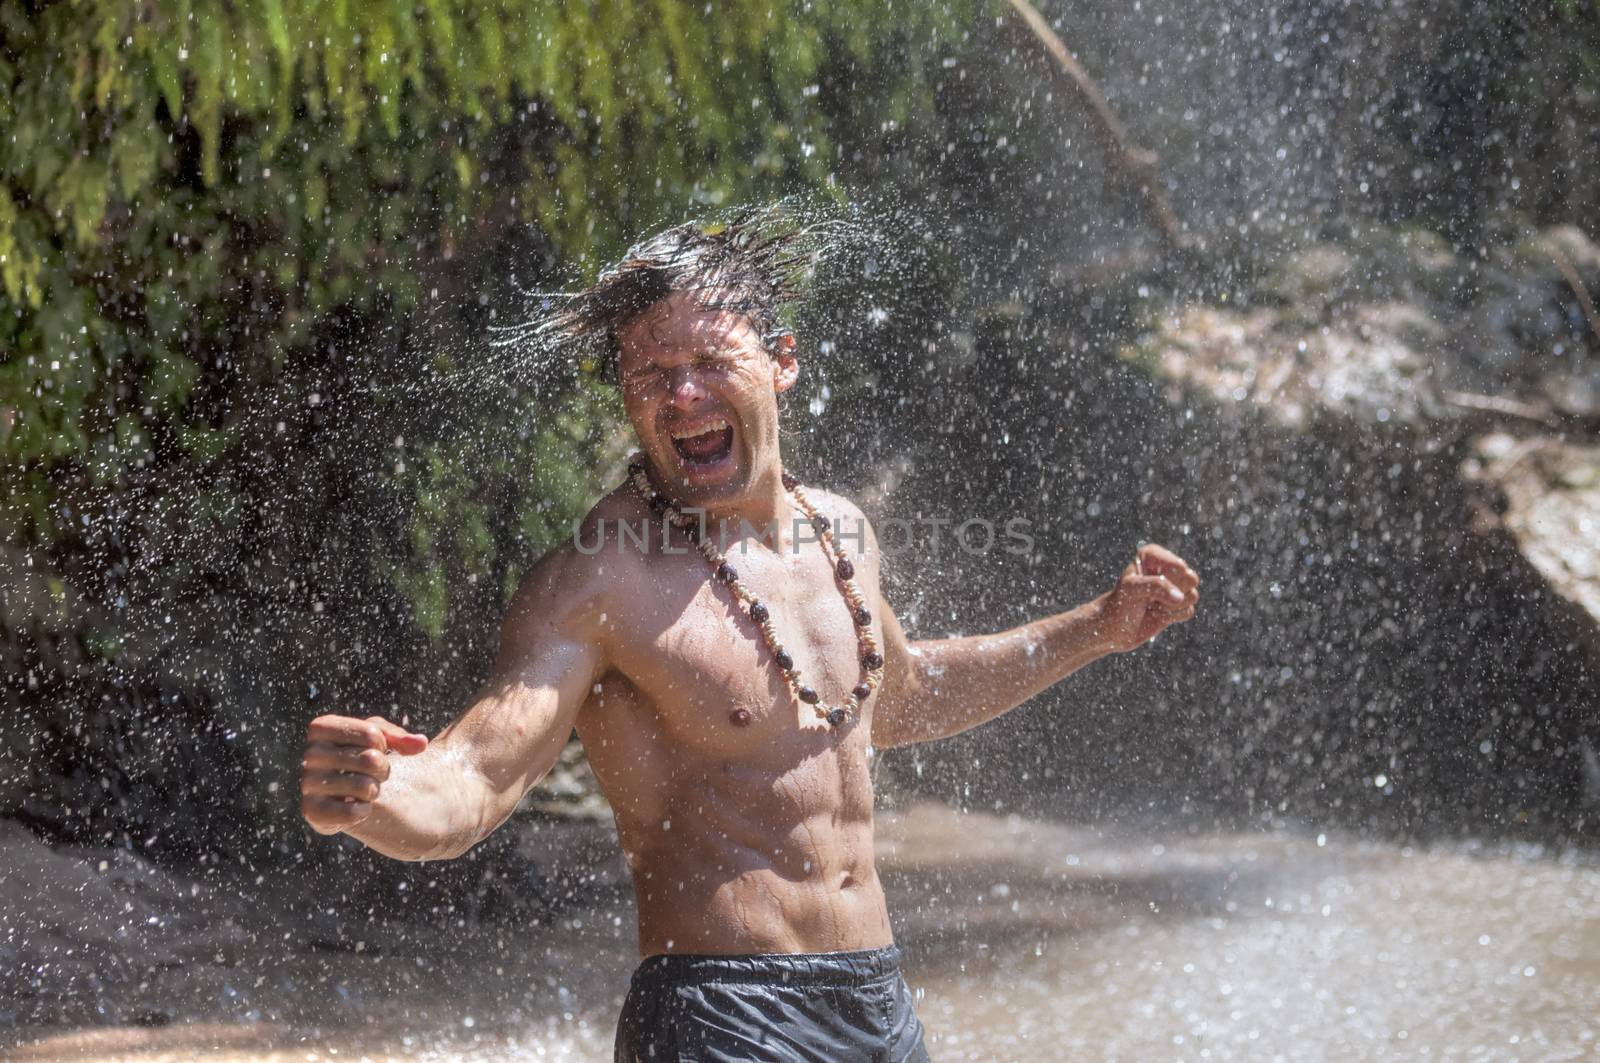 Handsome muscular shirtless Caucasian man flexes and shakes water from hair in euphoric excitement as he stands under raining tropical waterfall in river